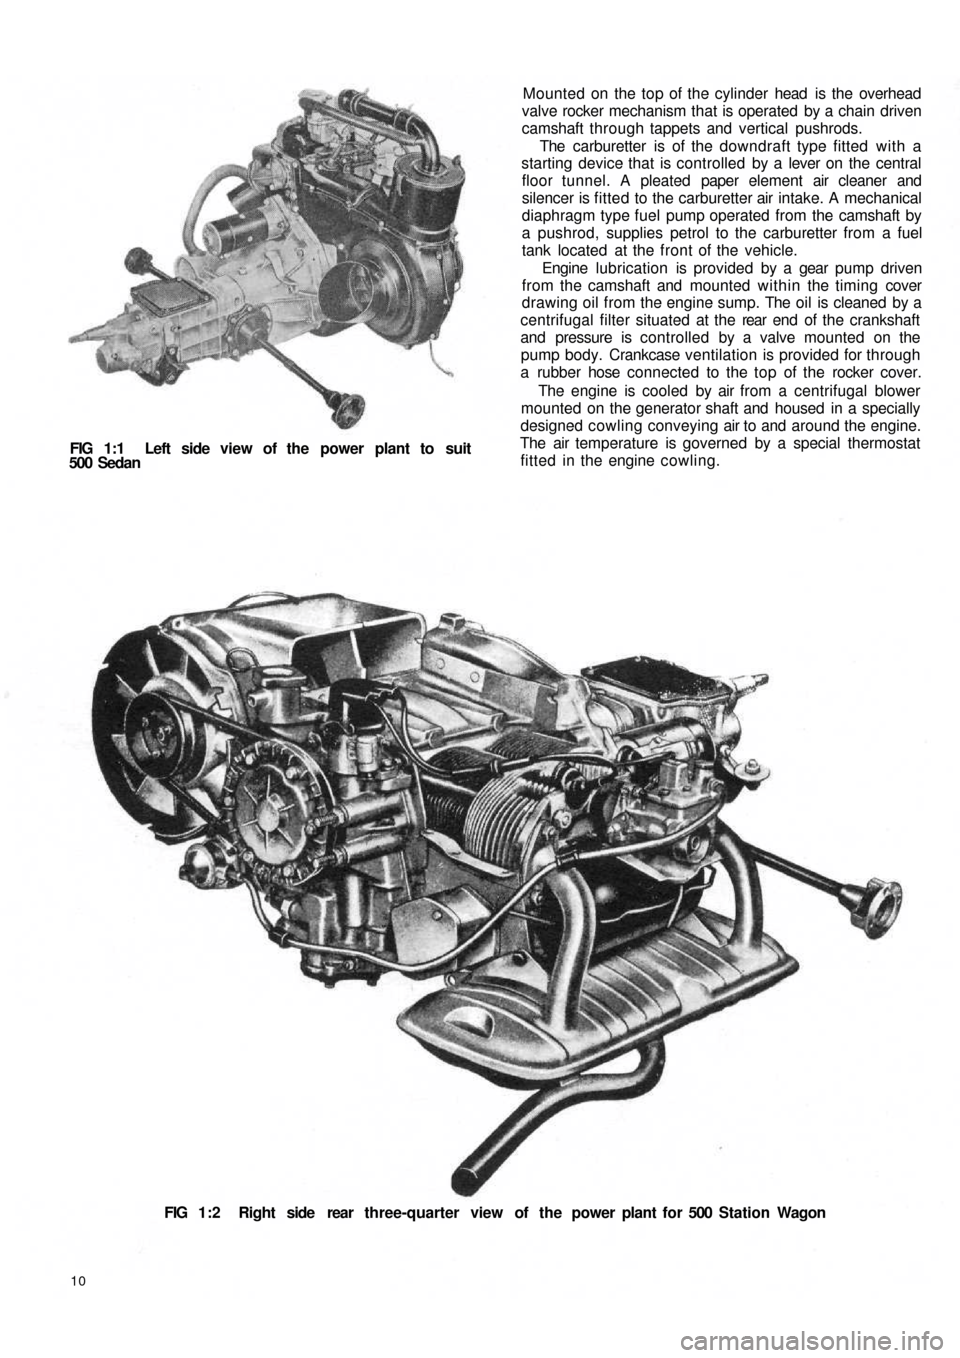 FIAT 500 1969 1.G Workshop Manual FIG 1:1  Left side view of the power plant to suit
500  Sedan
10
FIG 1:2  Right side  rear  three-quarter view of the power plant for 500 Station  Wagon Mounted on the top of the cylinder  head  is th